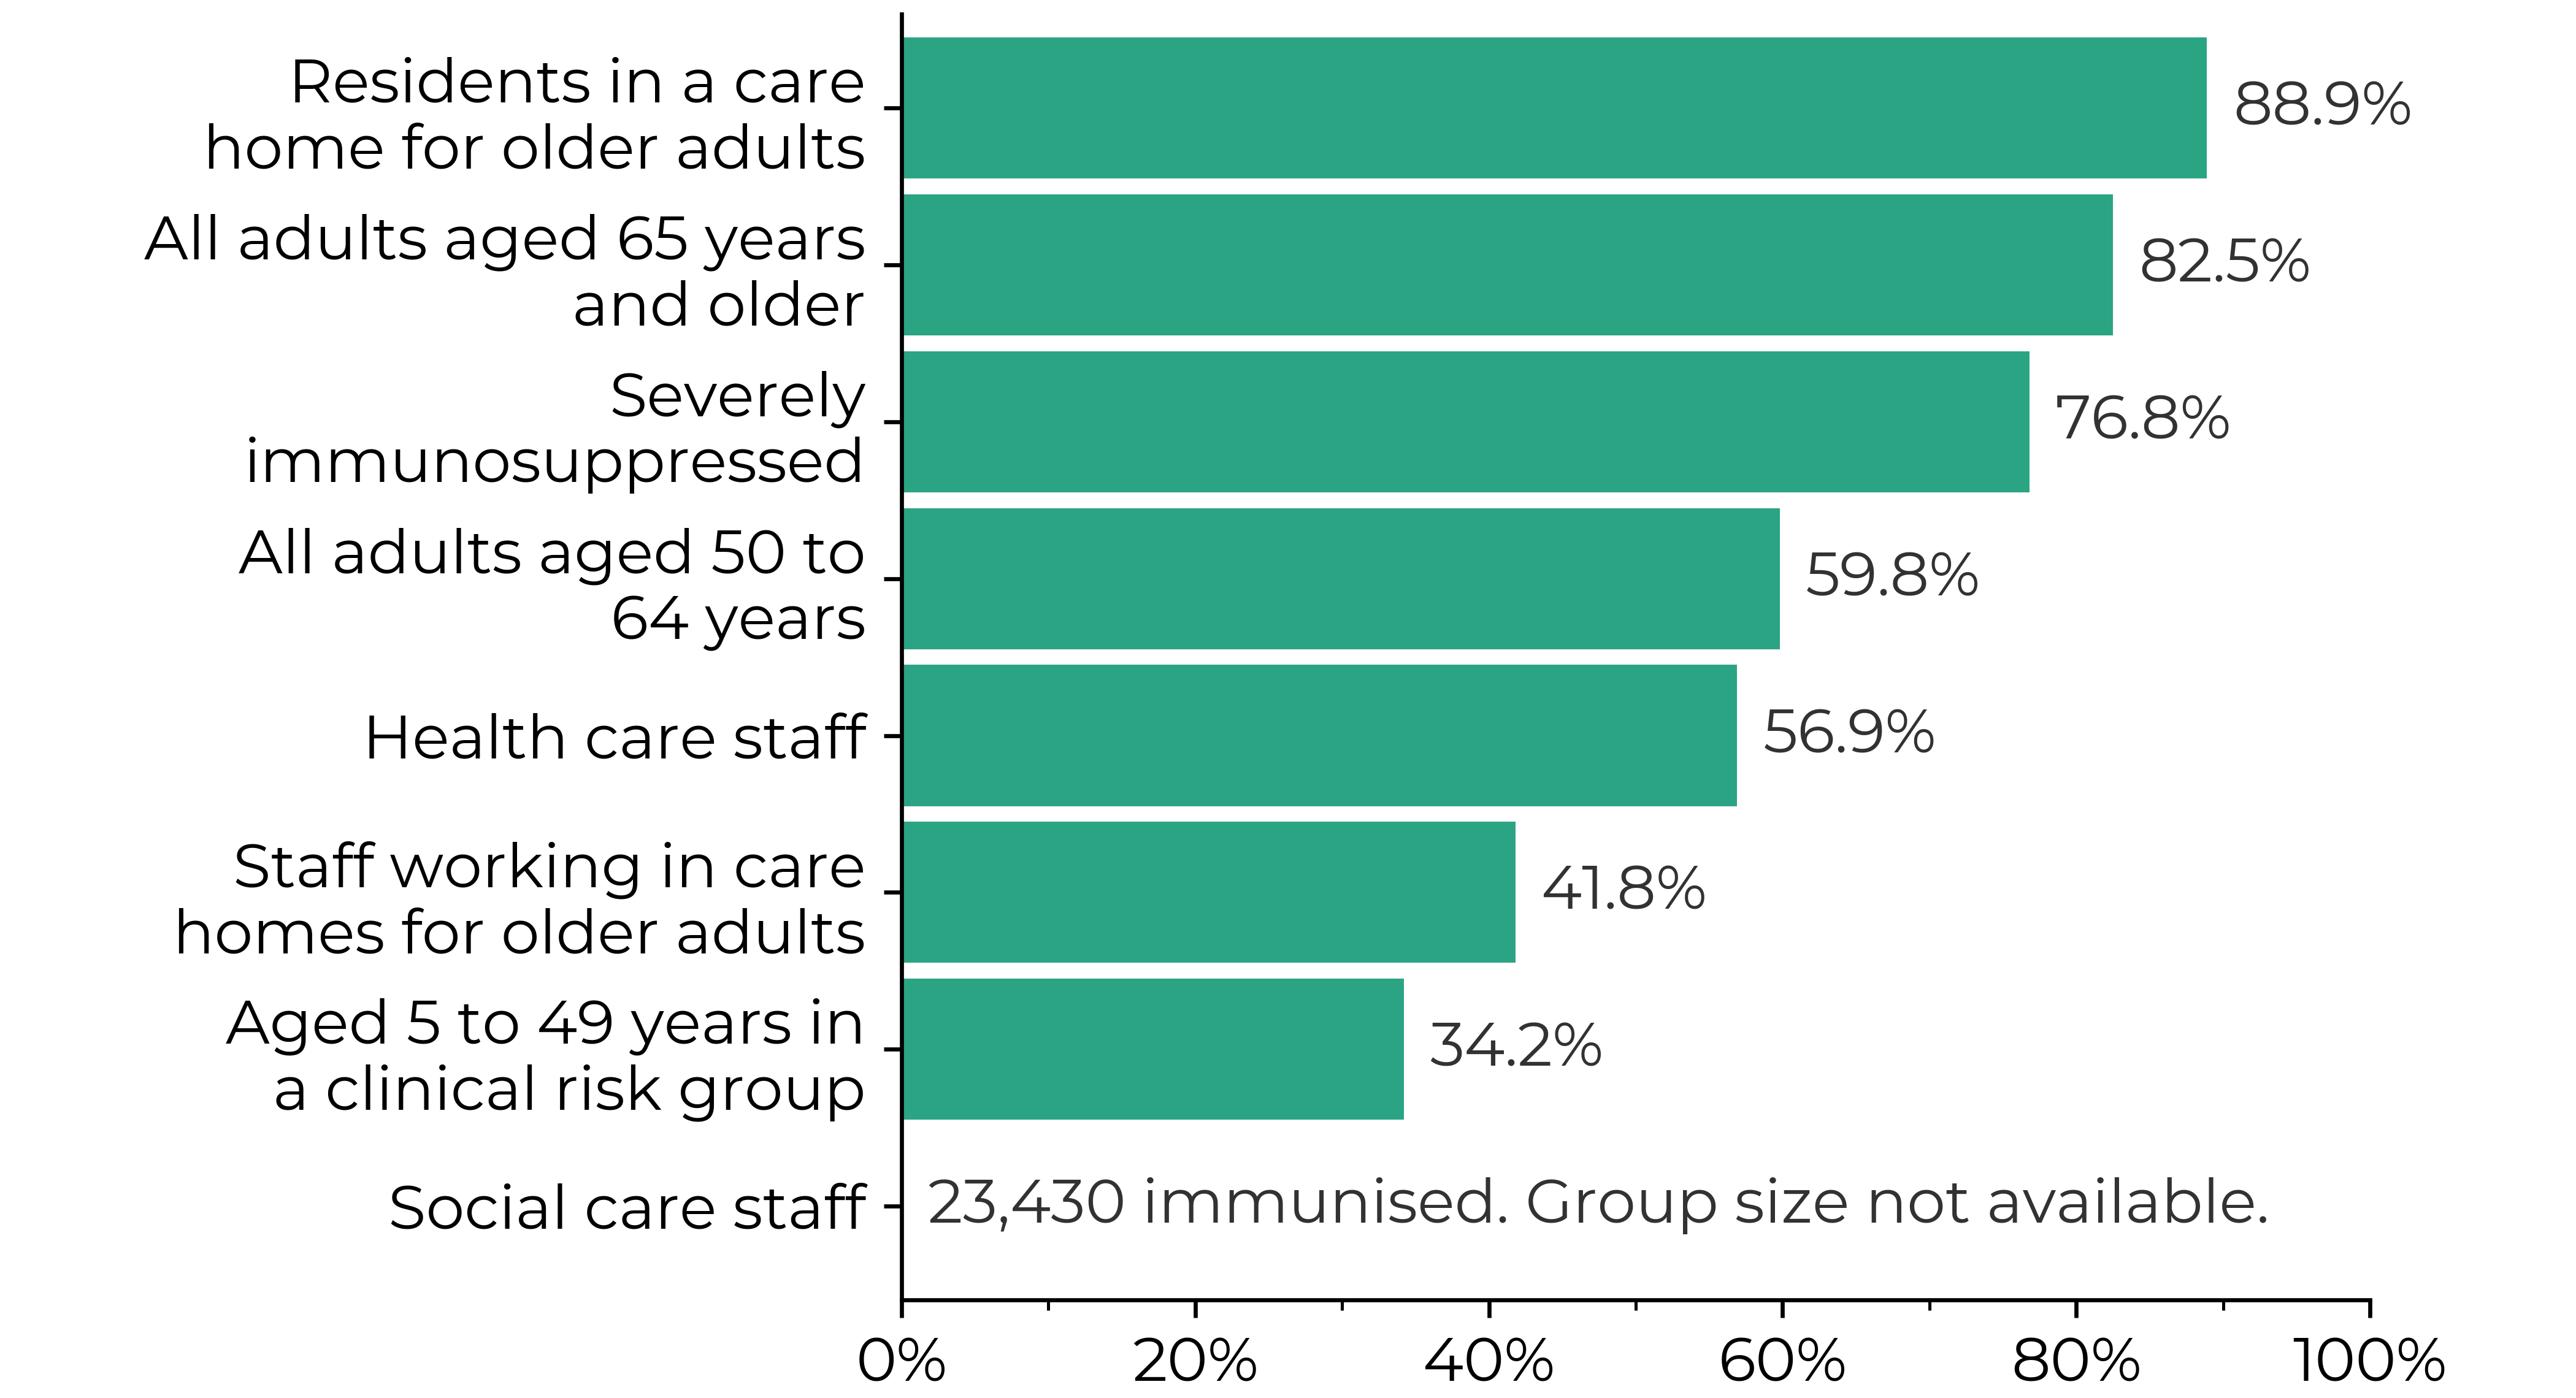 Residents in a care home for older adults 88.9%, All adults aged 65 years and older 82.5%, Severely immunosuppressed 76.8%, All adults aged 50 to 64 years 59.8%, Health care staff 56.9%, Staff working in care homes for older adults 41.8%, Aged 5 to 49 years in a clinical risk group 34.2%, Social care staff 23,430 immunised (group size not available).